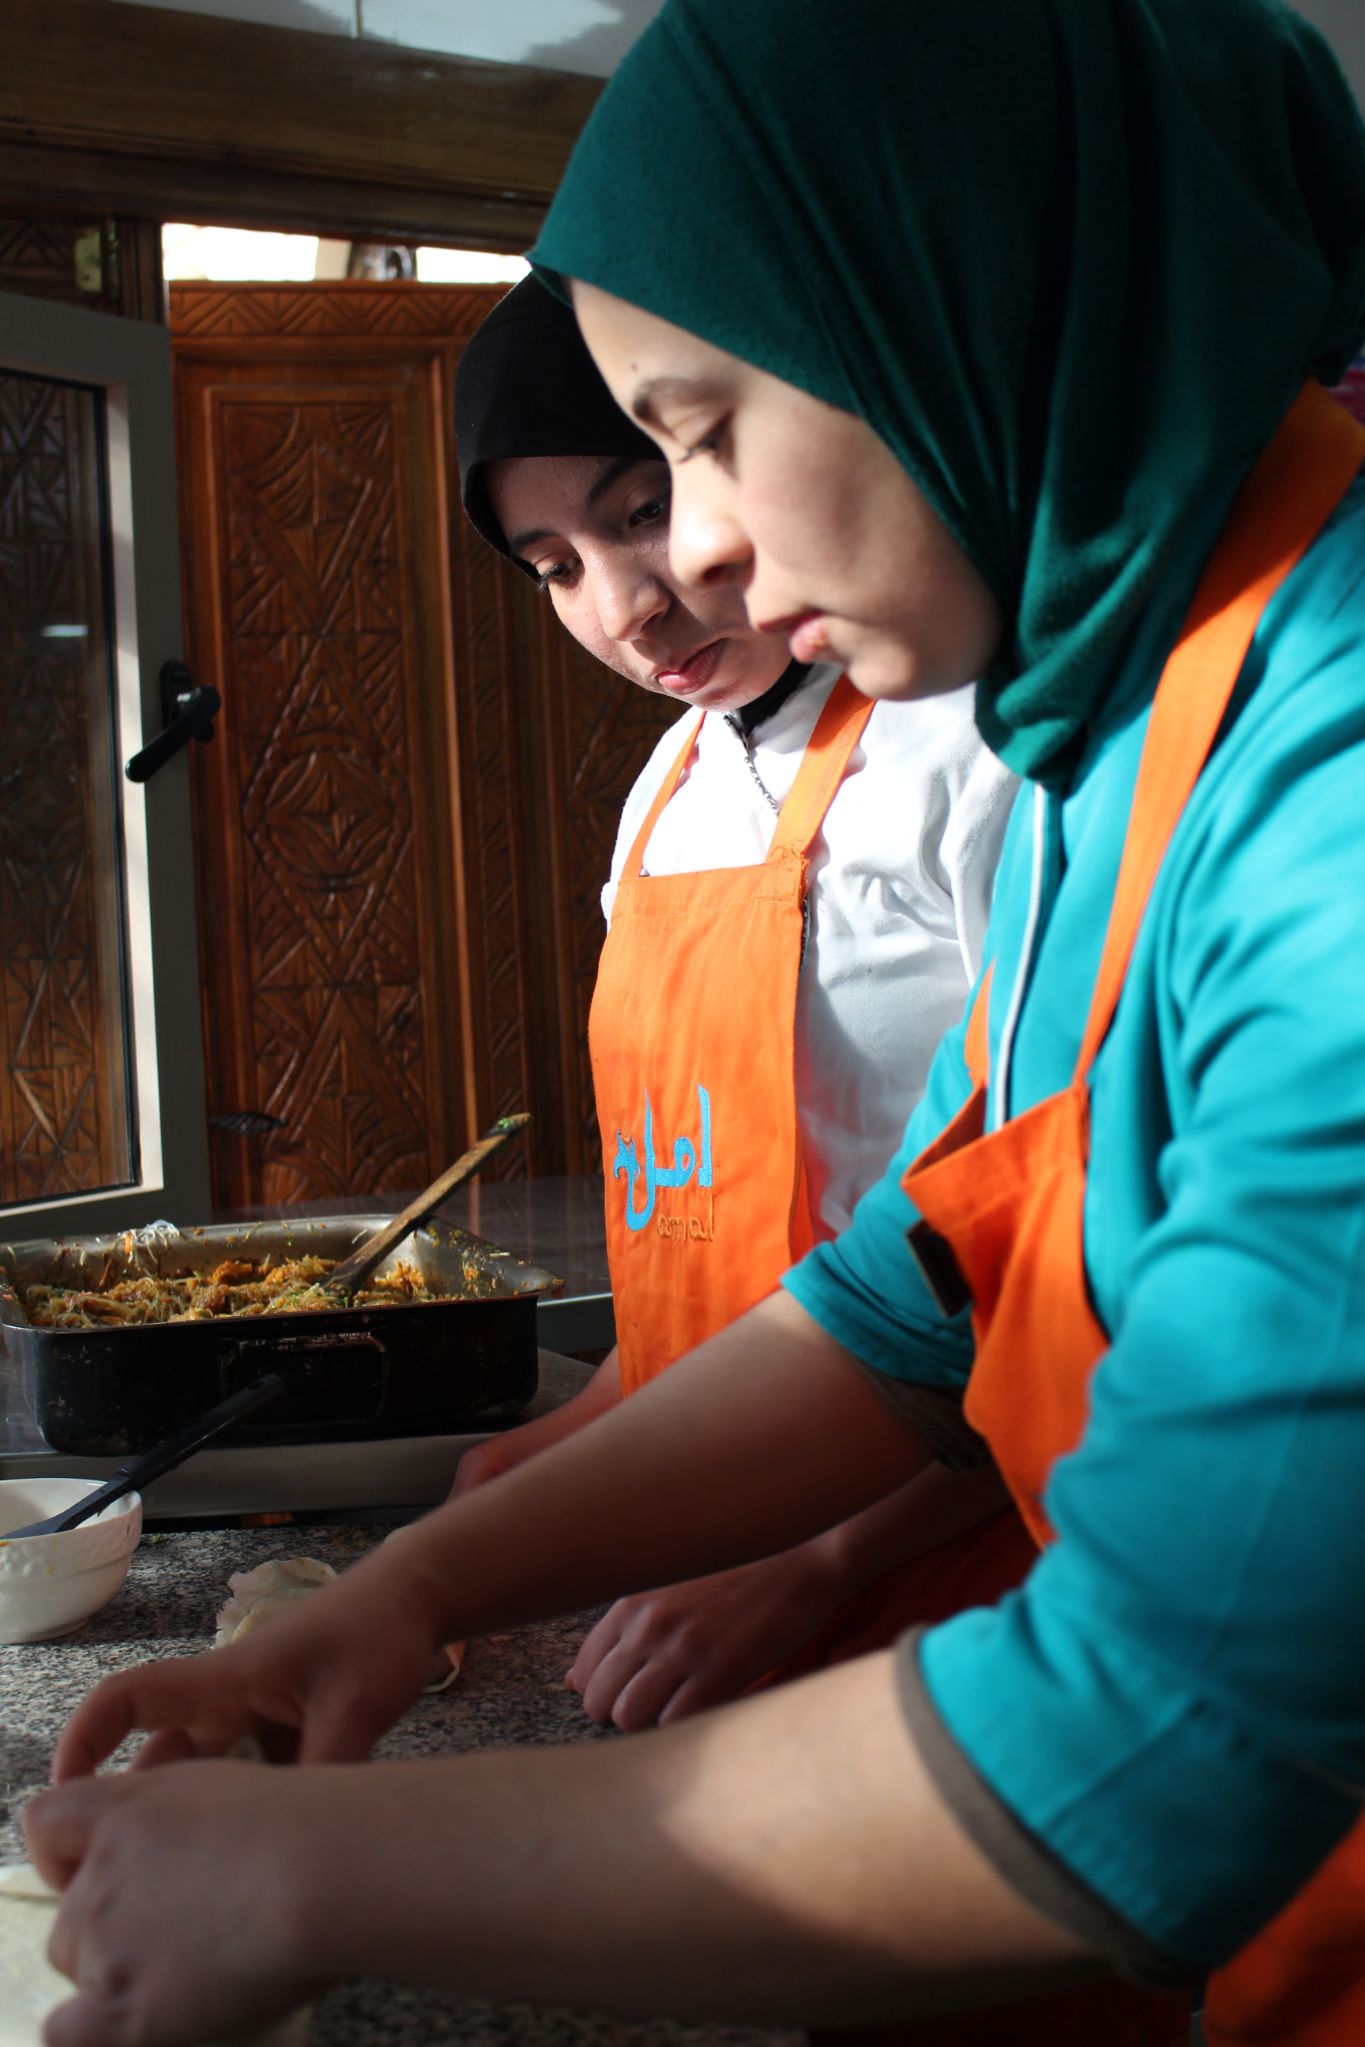 Over 300 women are trained in cooking, which often leads to employment